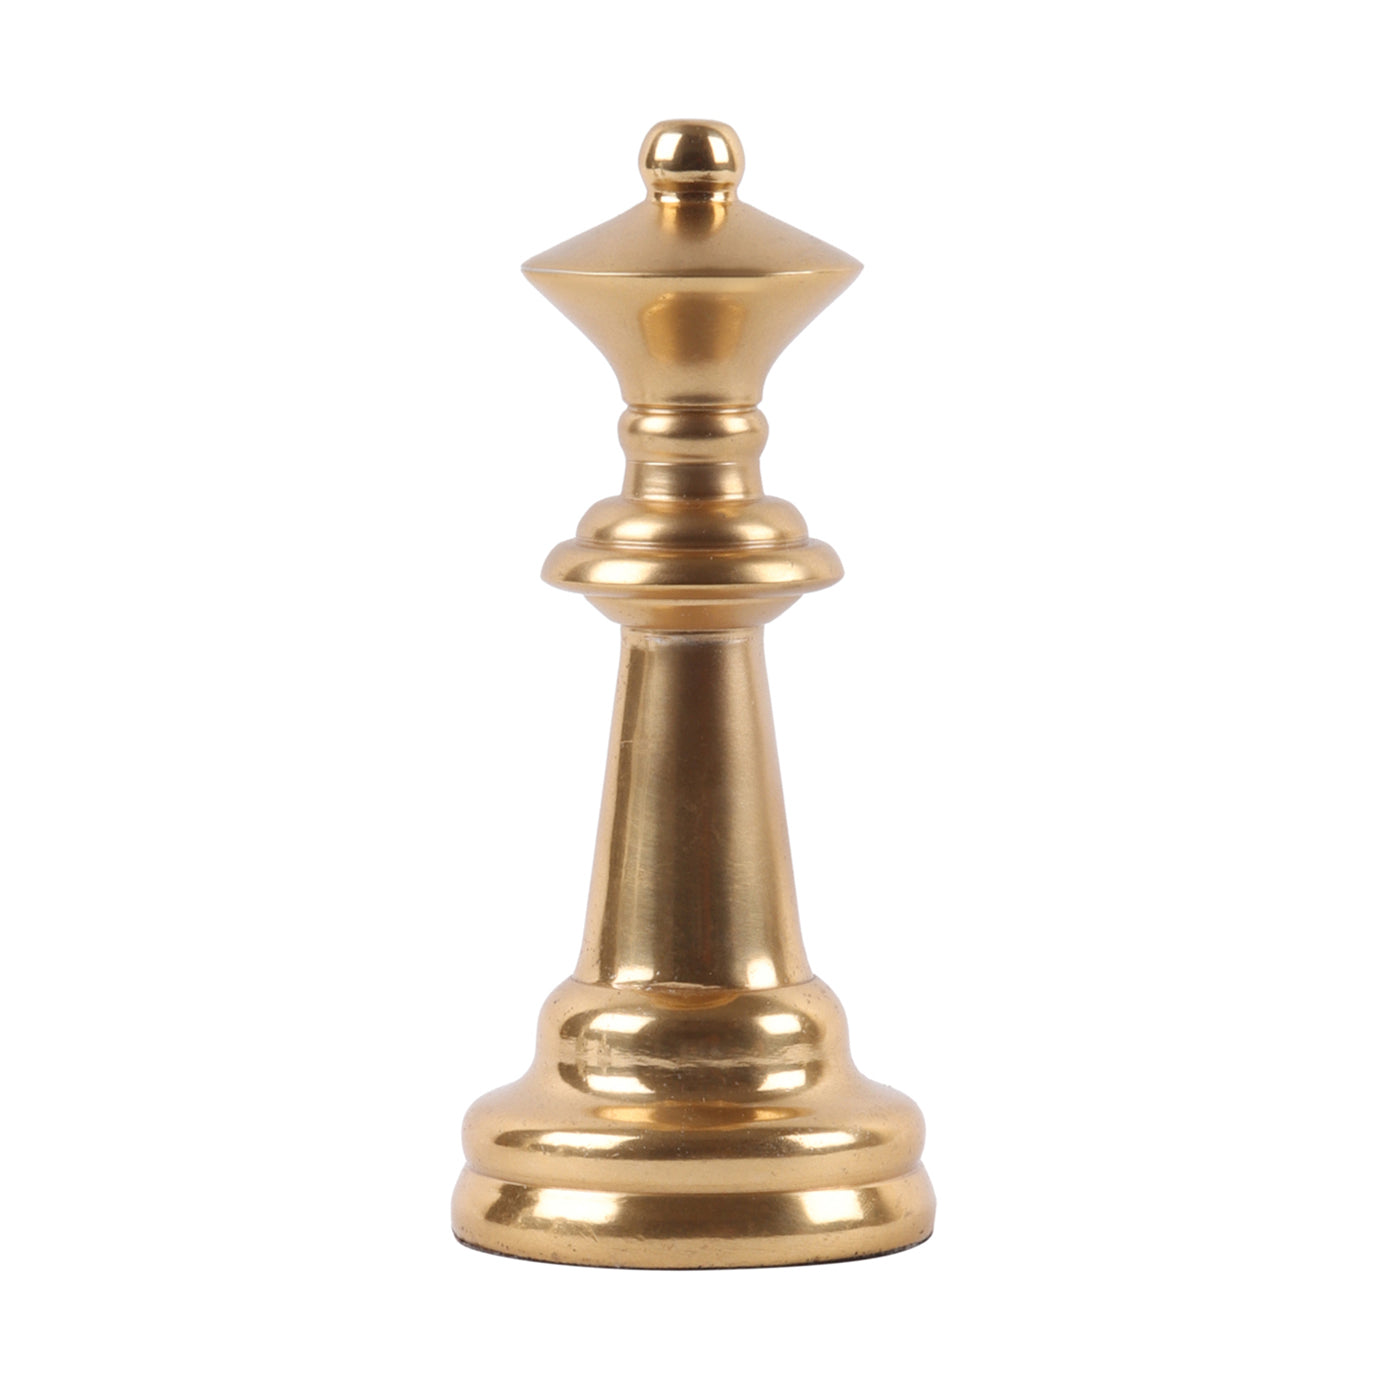 Decorative chess king queen gold small